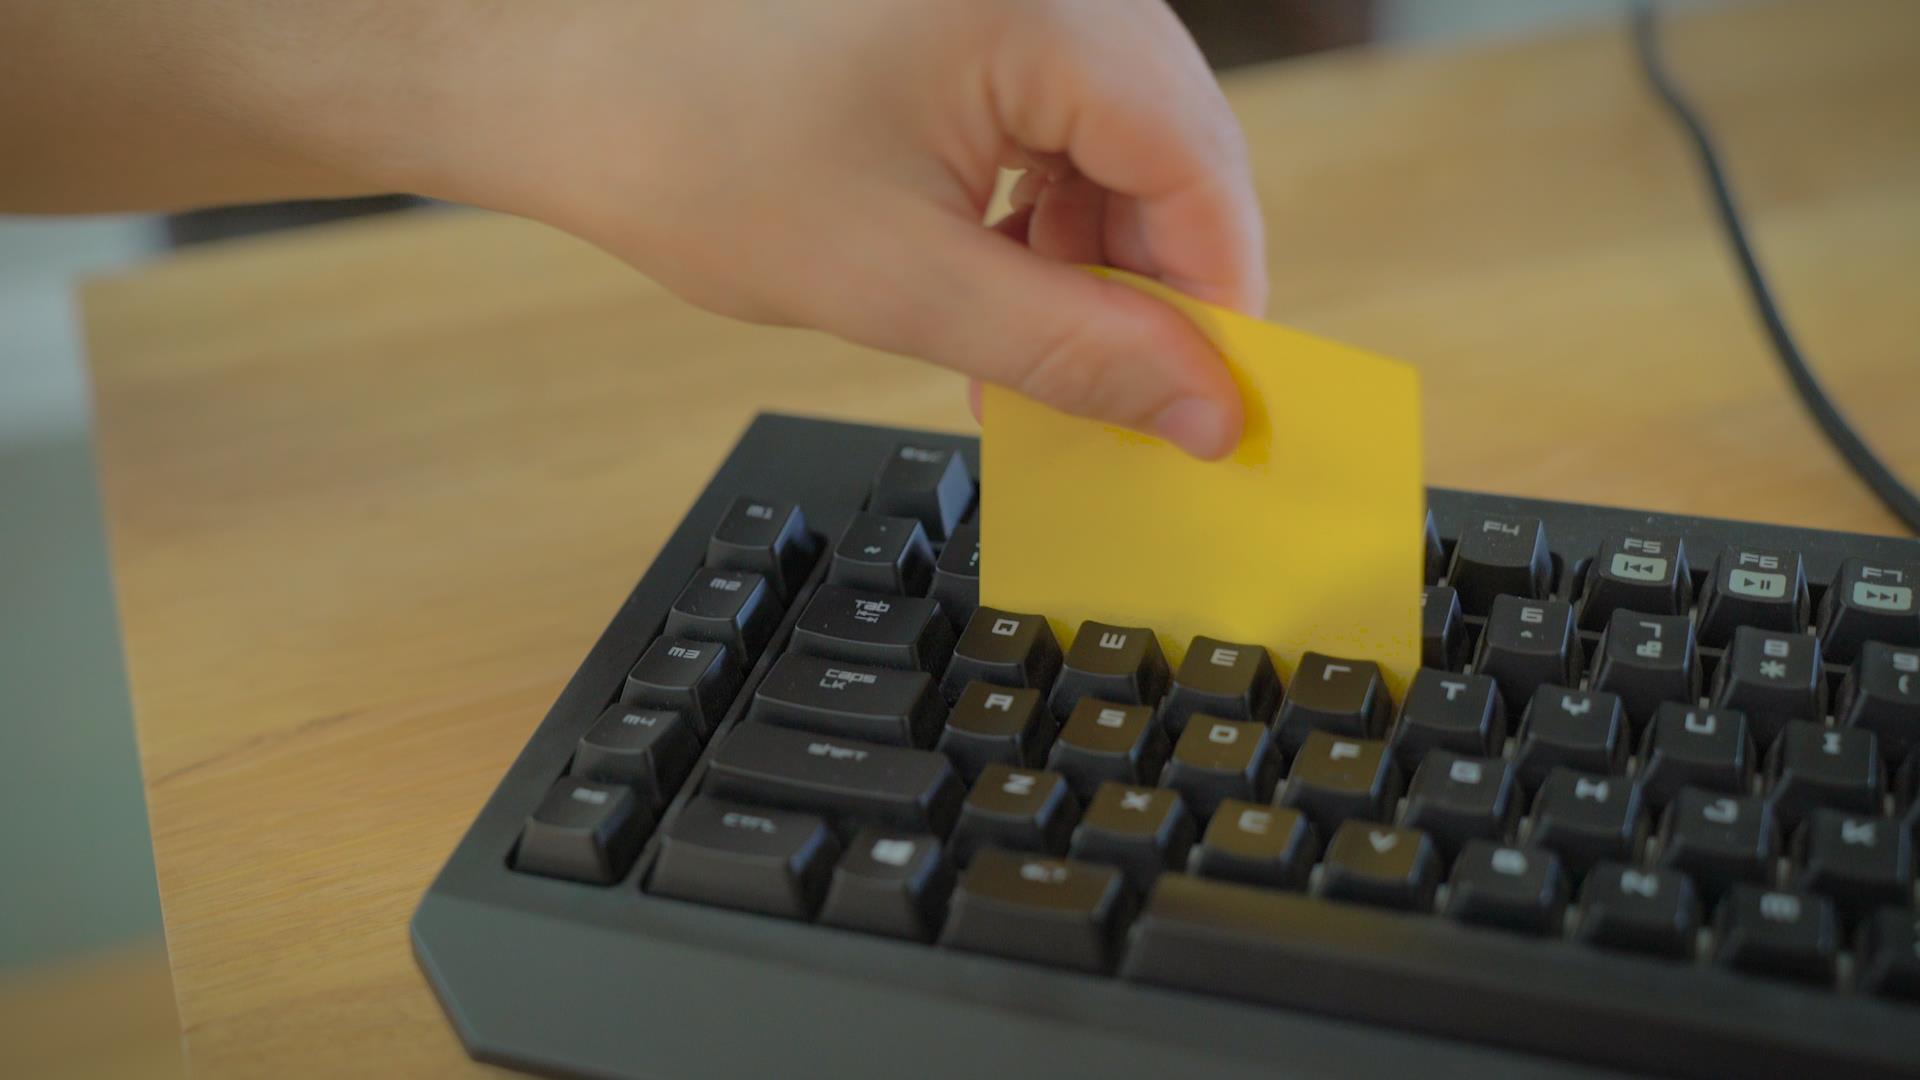 How To Clean Your Keyboard From Crumbs And Dust